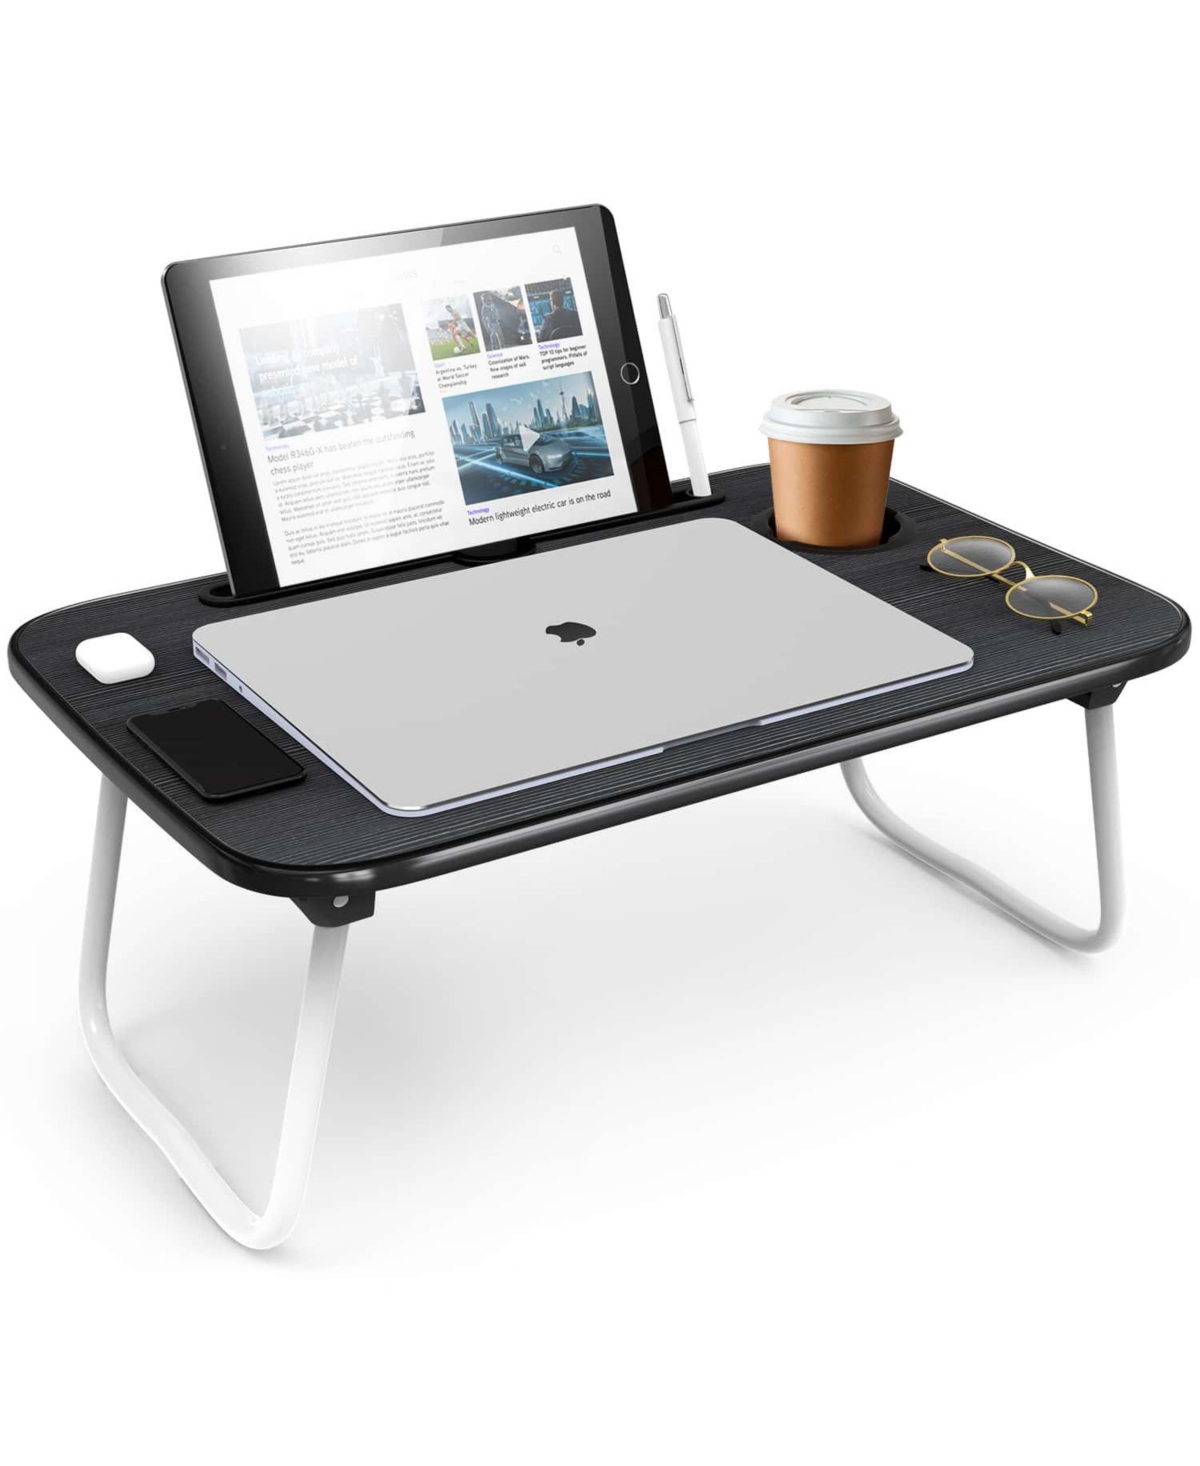 Foldable Lap Desk - Portable & Lightweight - Ideal for Working, Reading, or Eating - Small - Gray wood